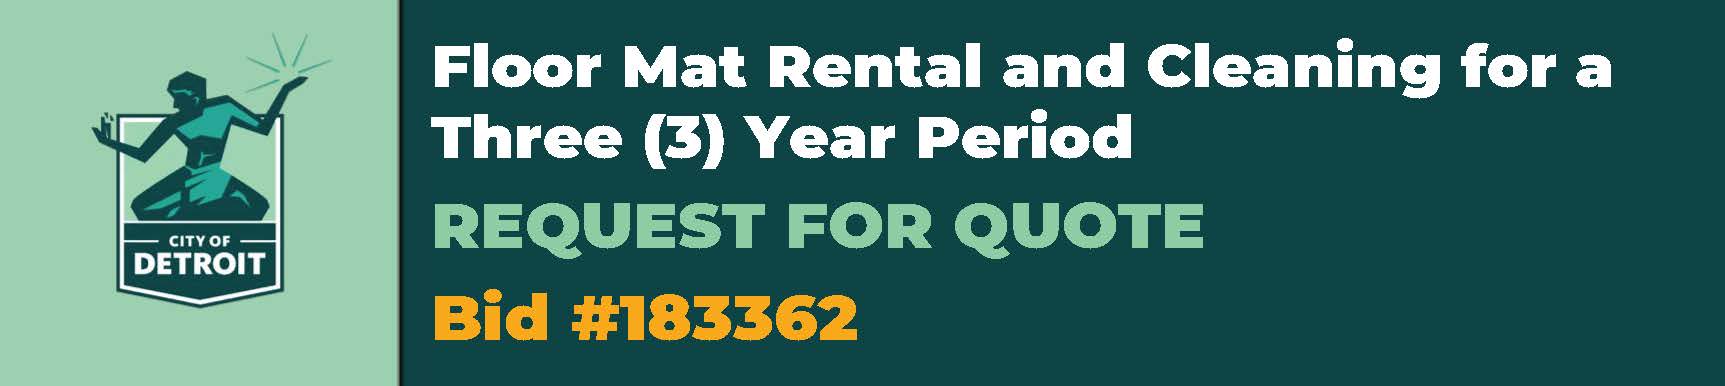 Floor Mat Rental and Cleaning for a three (3) year period